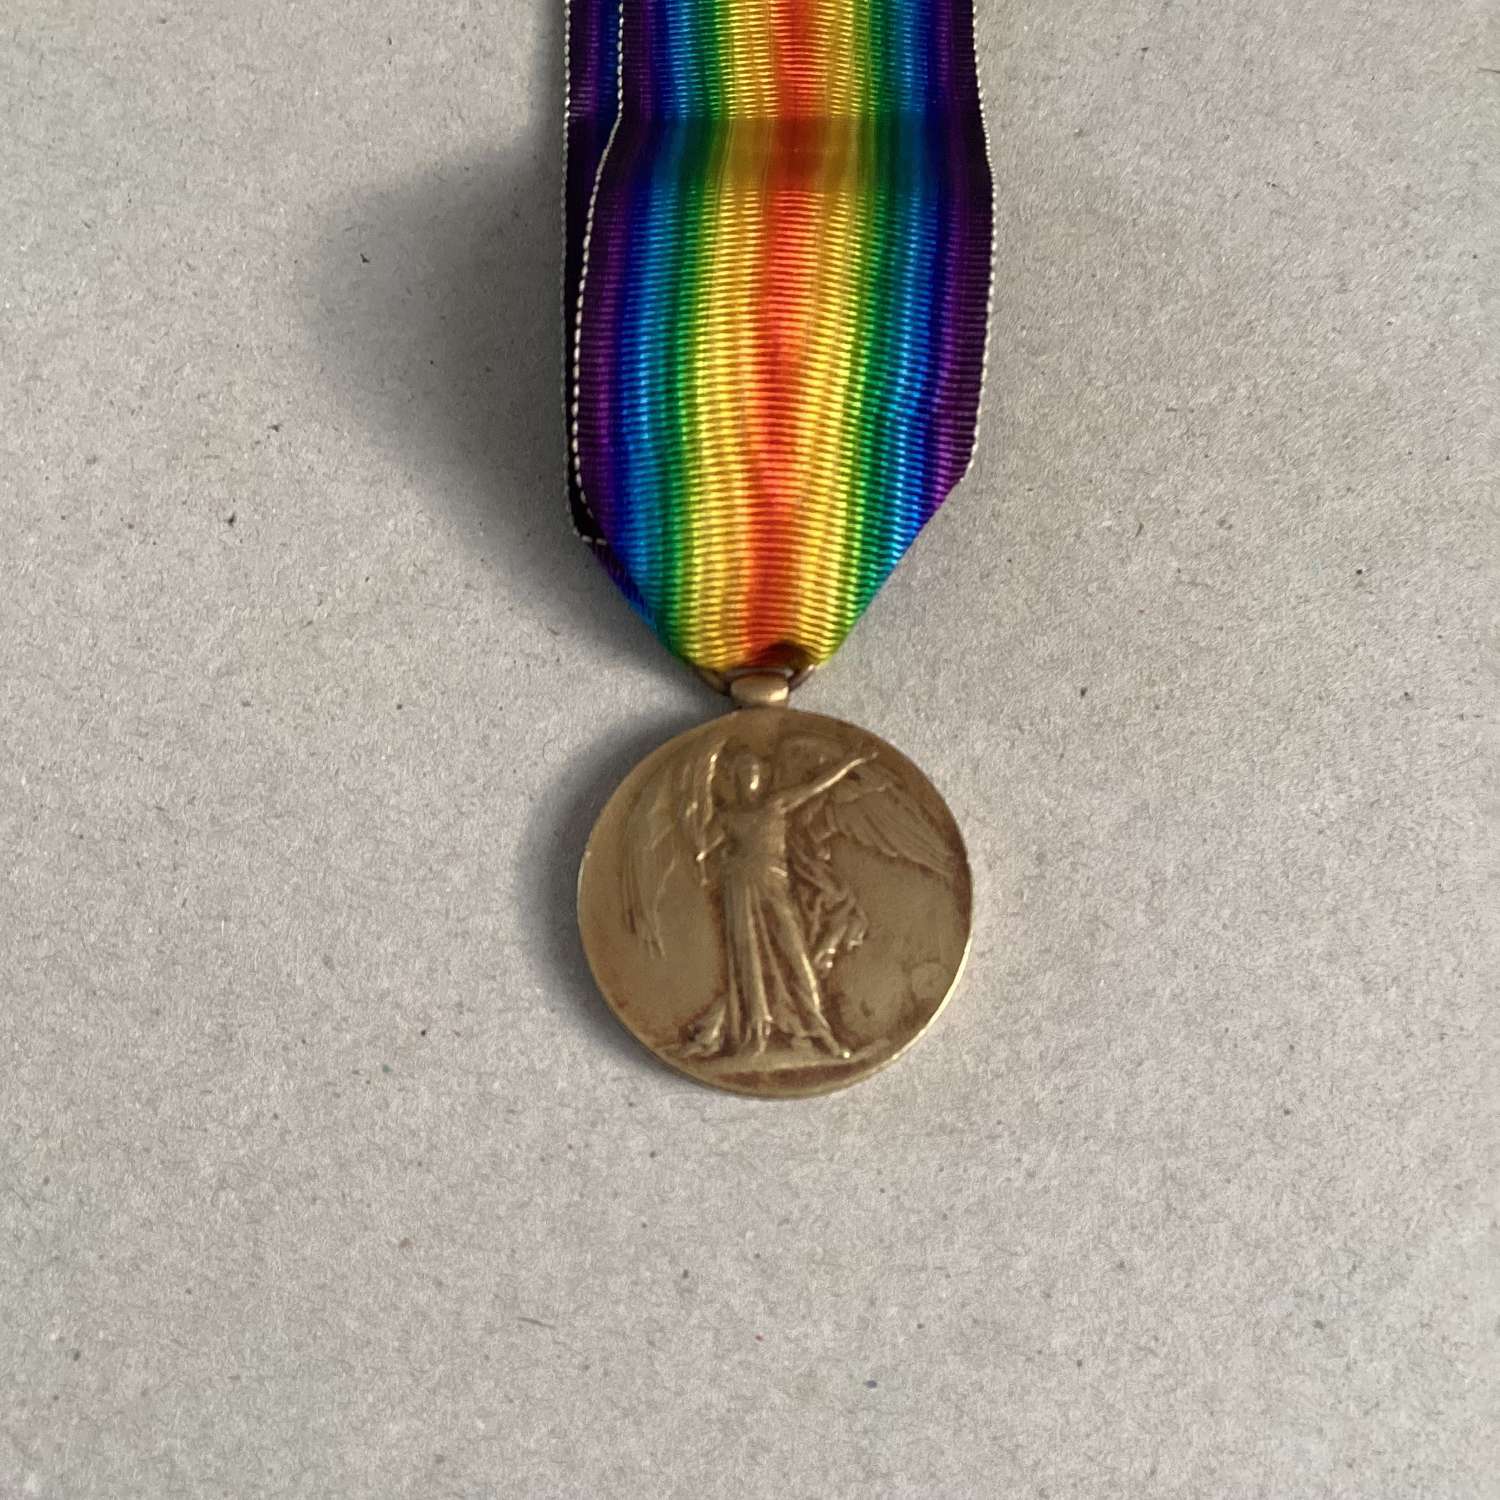 Victory Medal, (3694 Cpl C Hurry Royal Artillery